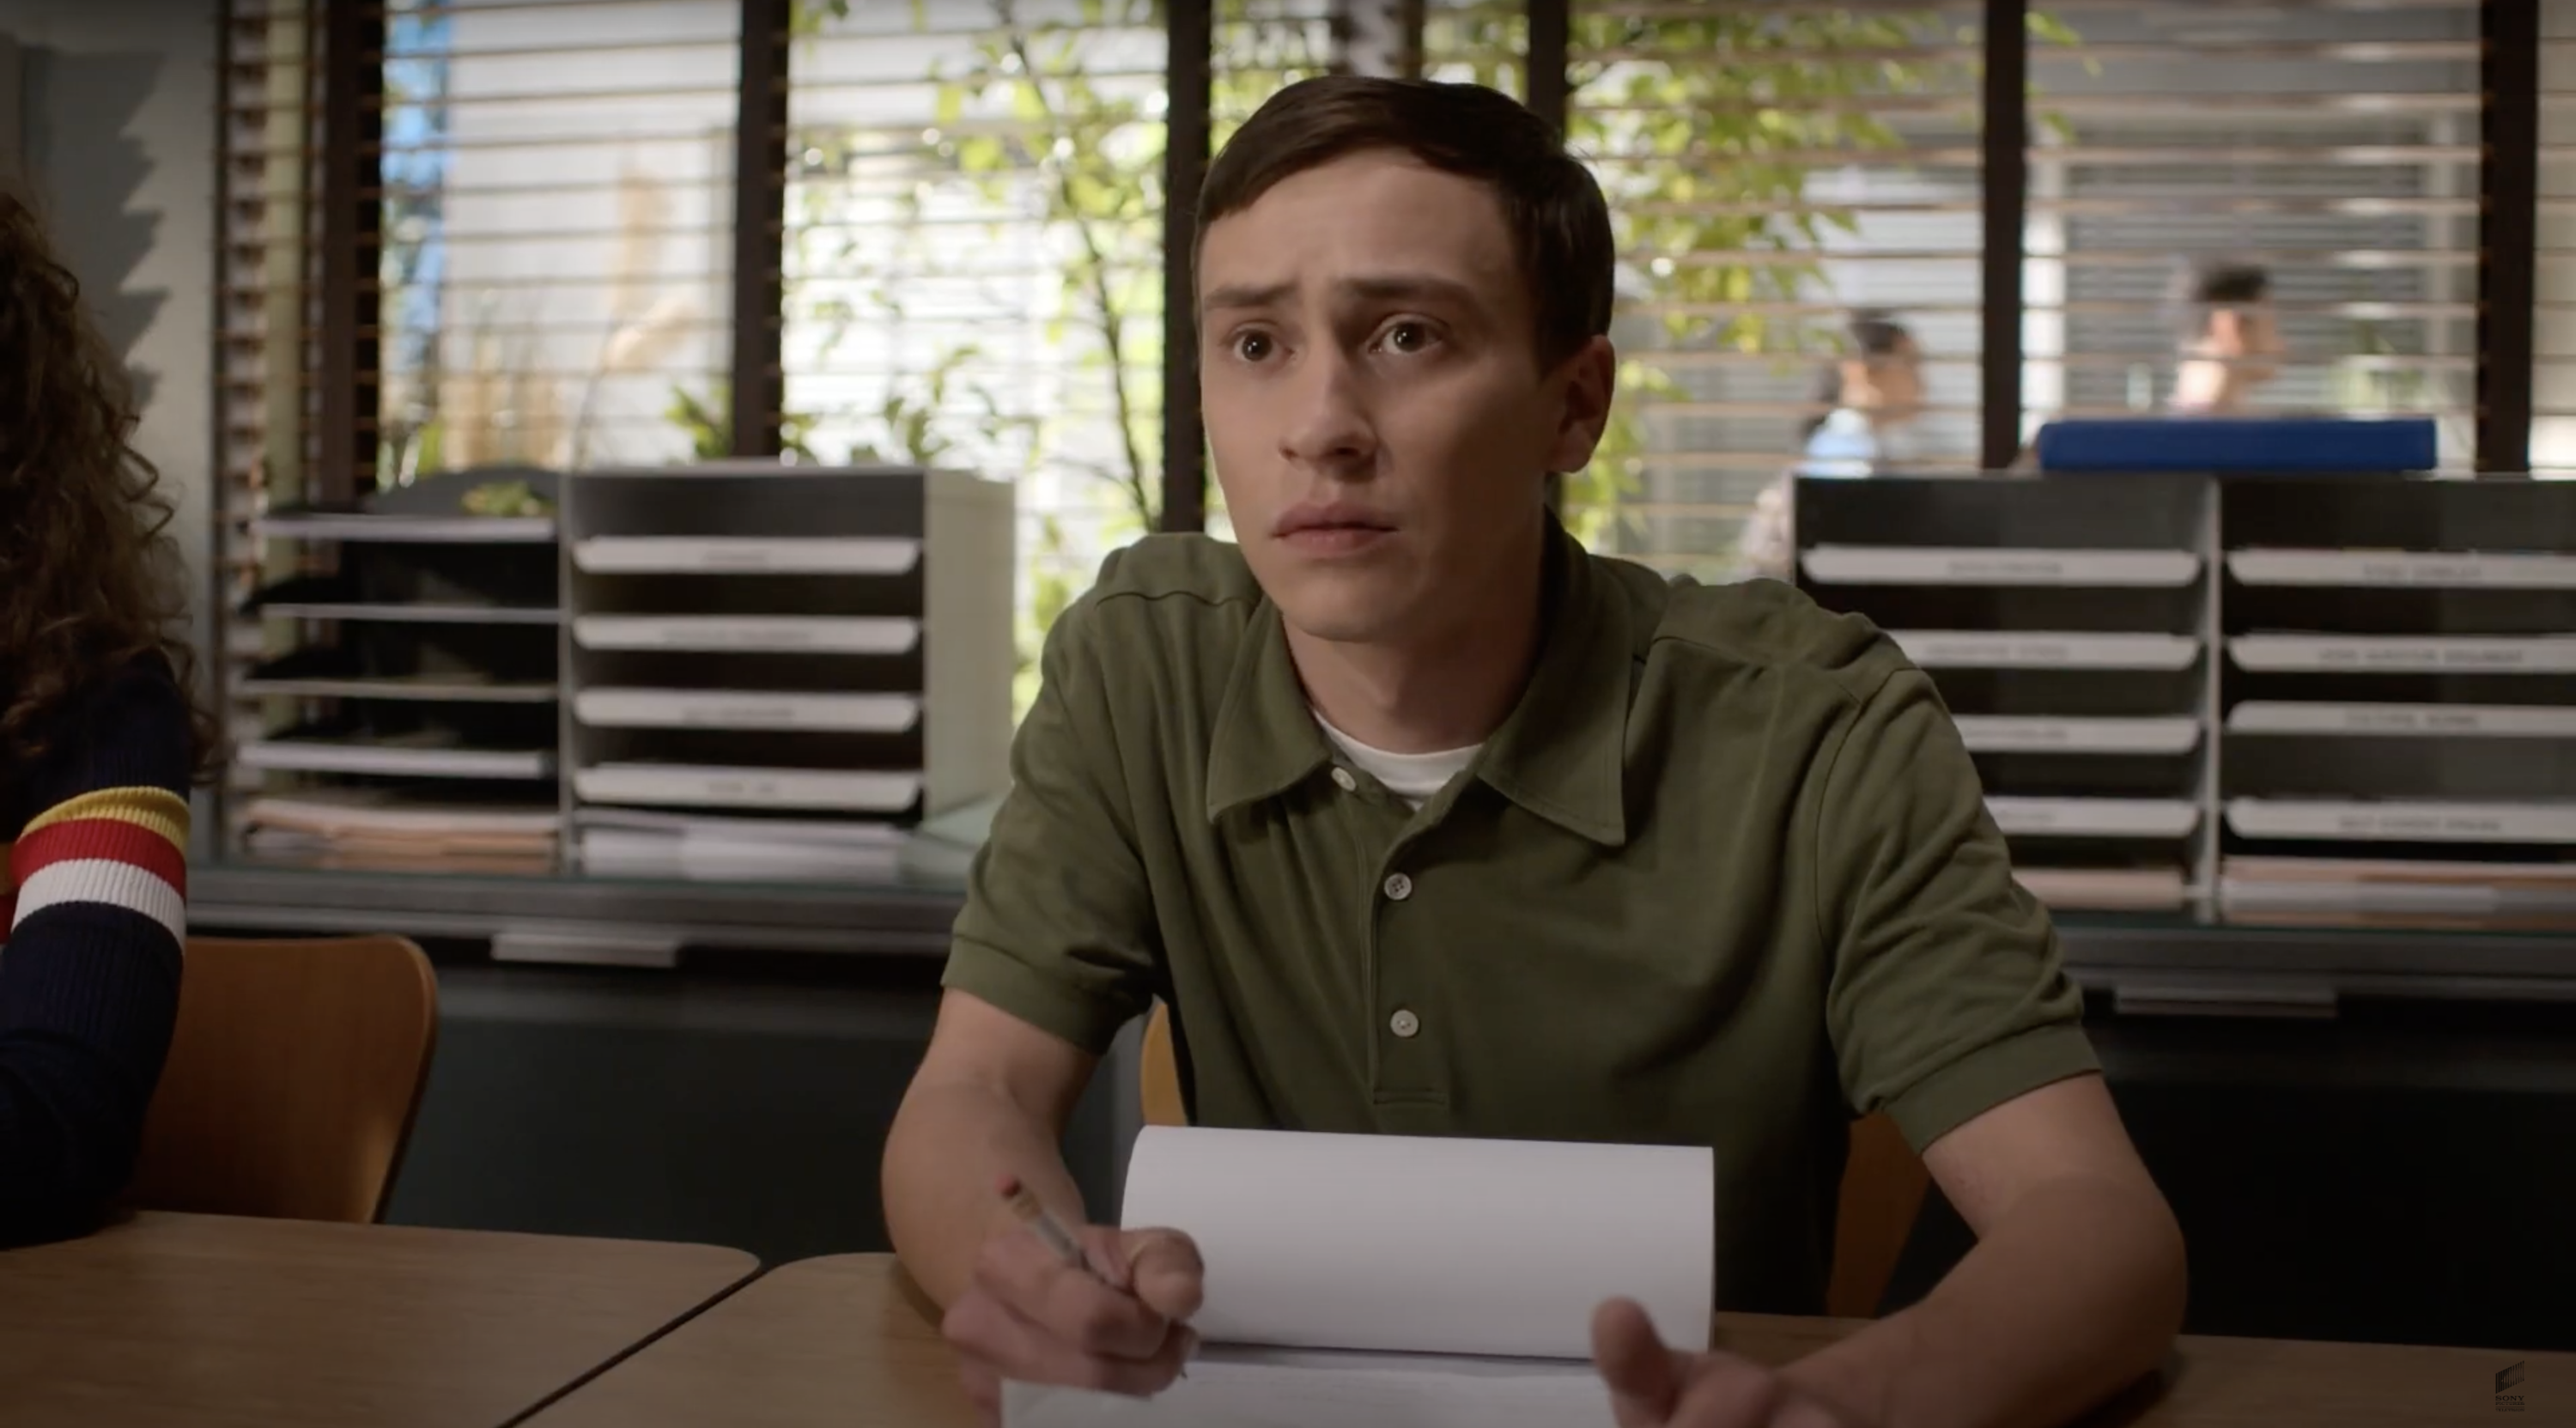 Keir Gilchrist as Sam struggles to speak during a Socratic seminar in &quot;Atypical&quot;